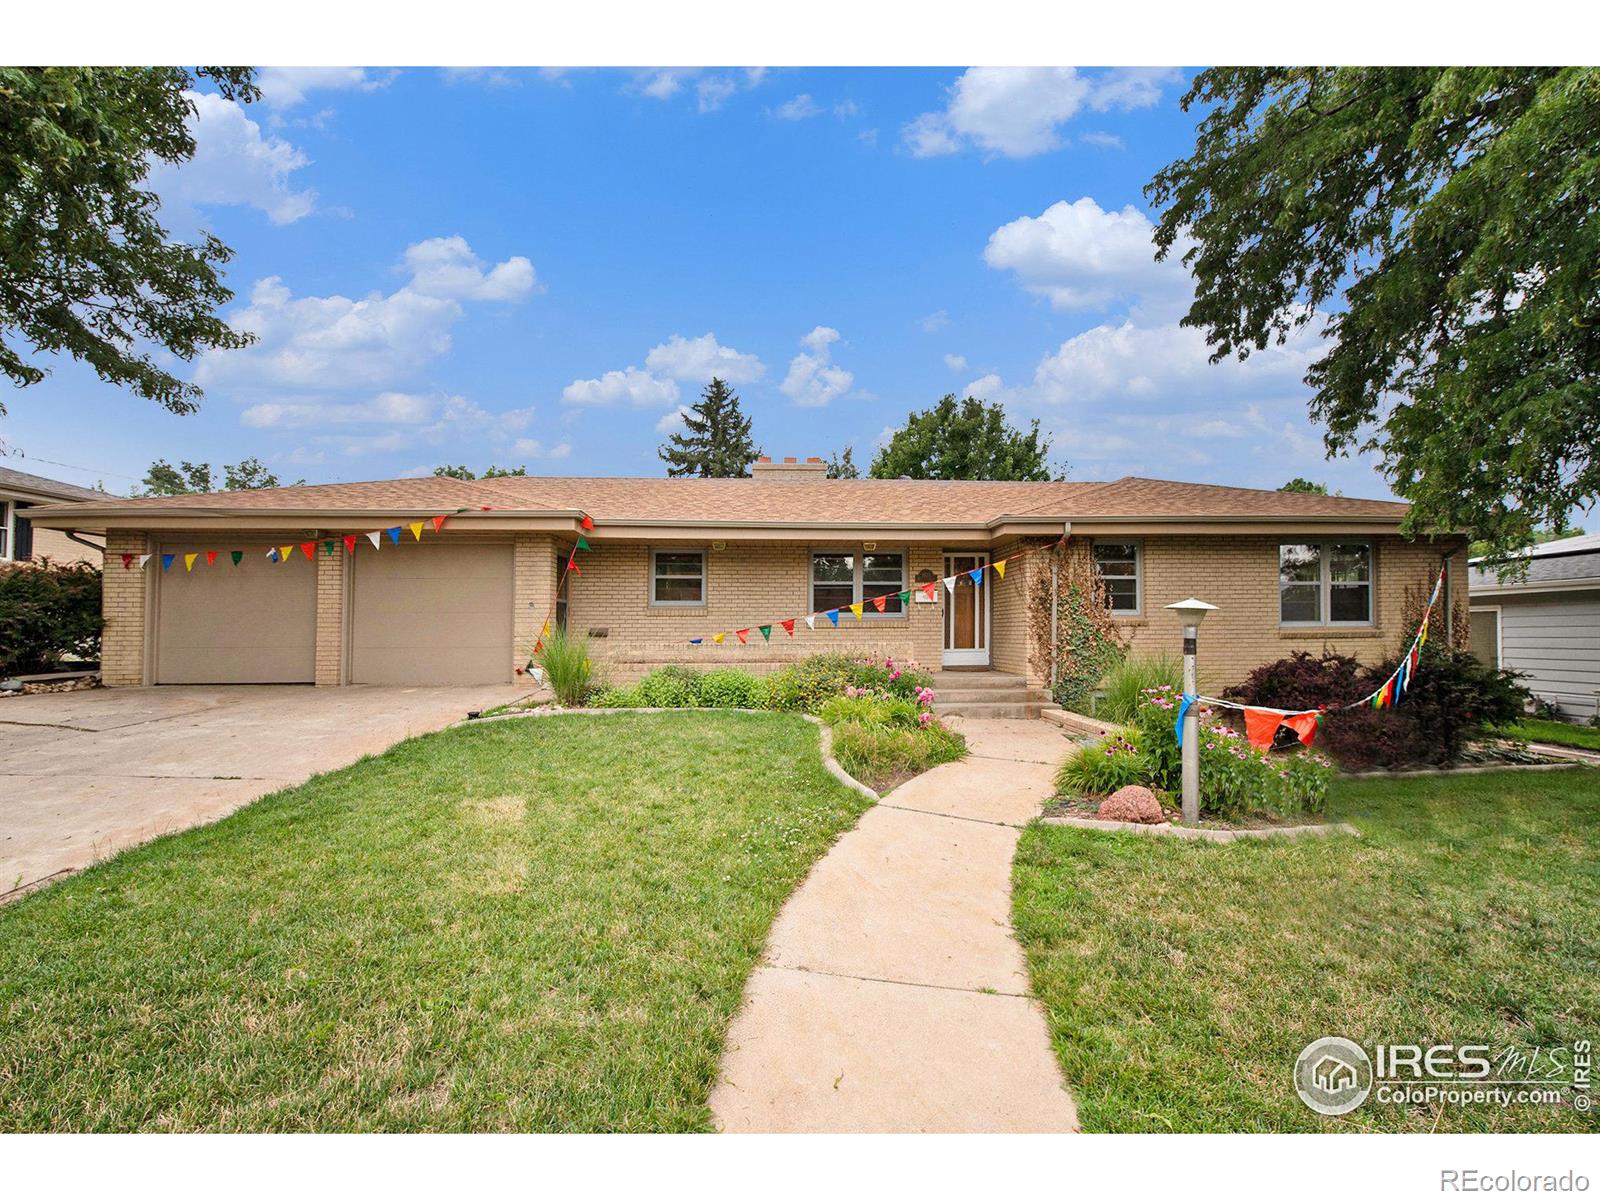 Report Image for 1925  Montview Drive,Greeley, Colorado